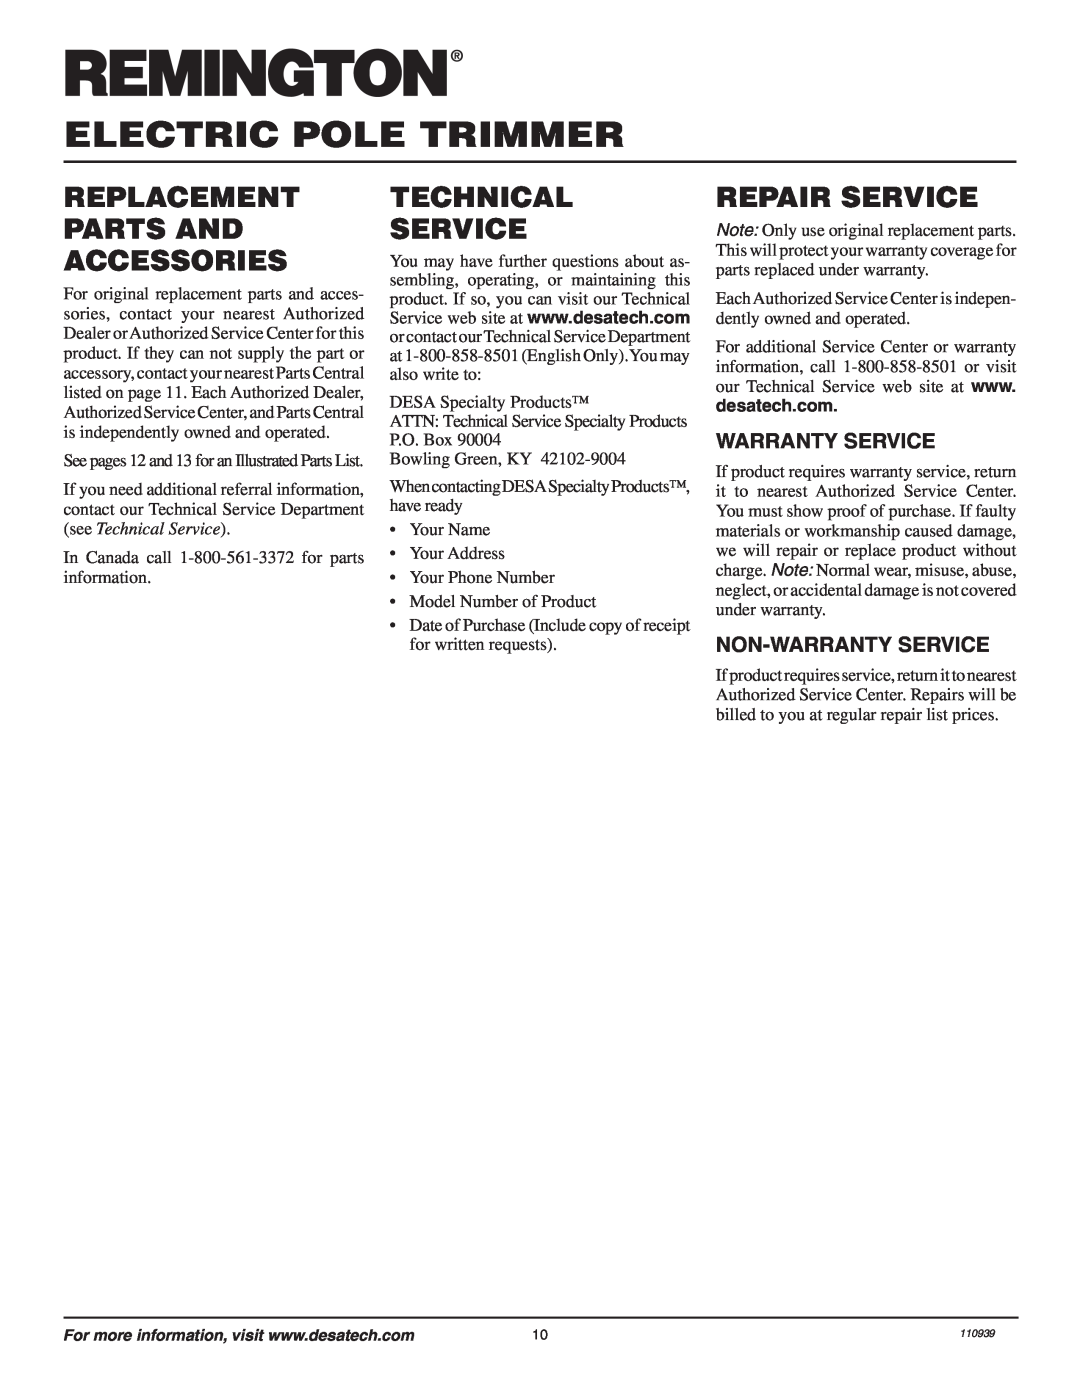 Remington 110946-01A owner manual Replacement Parts And Accessories, Technical Service, Repair Service, Warranty Service 